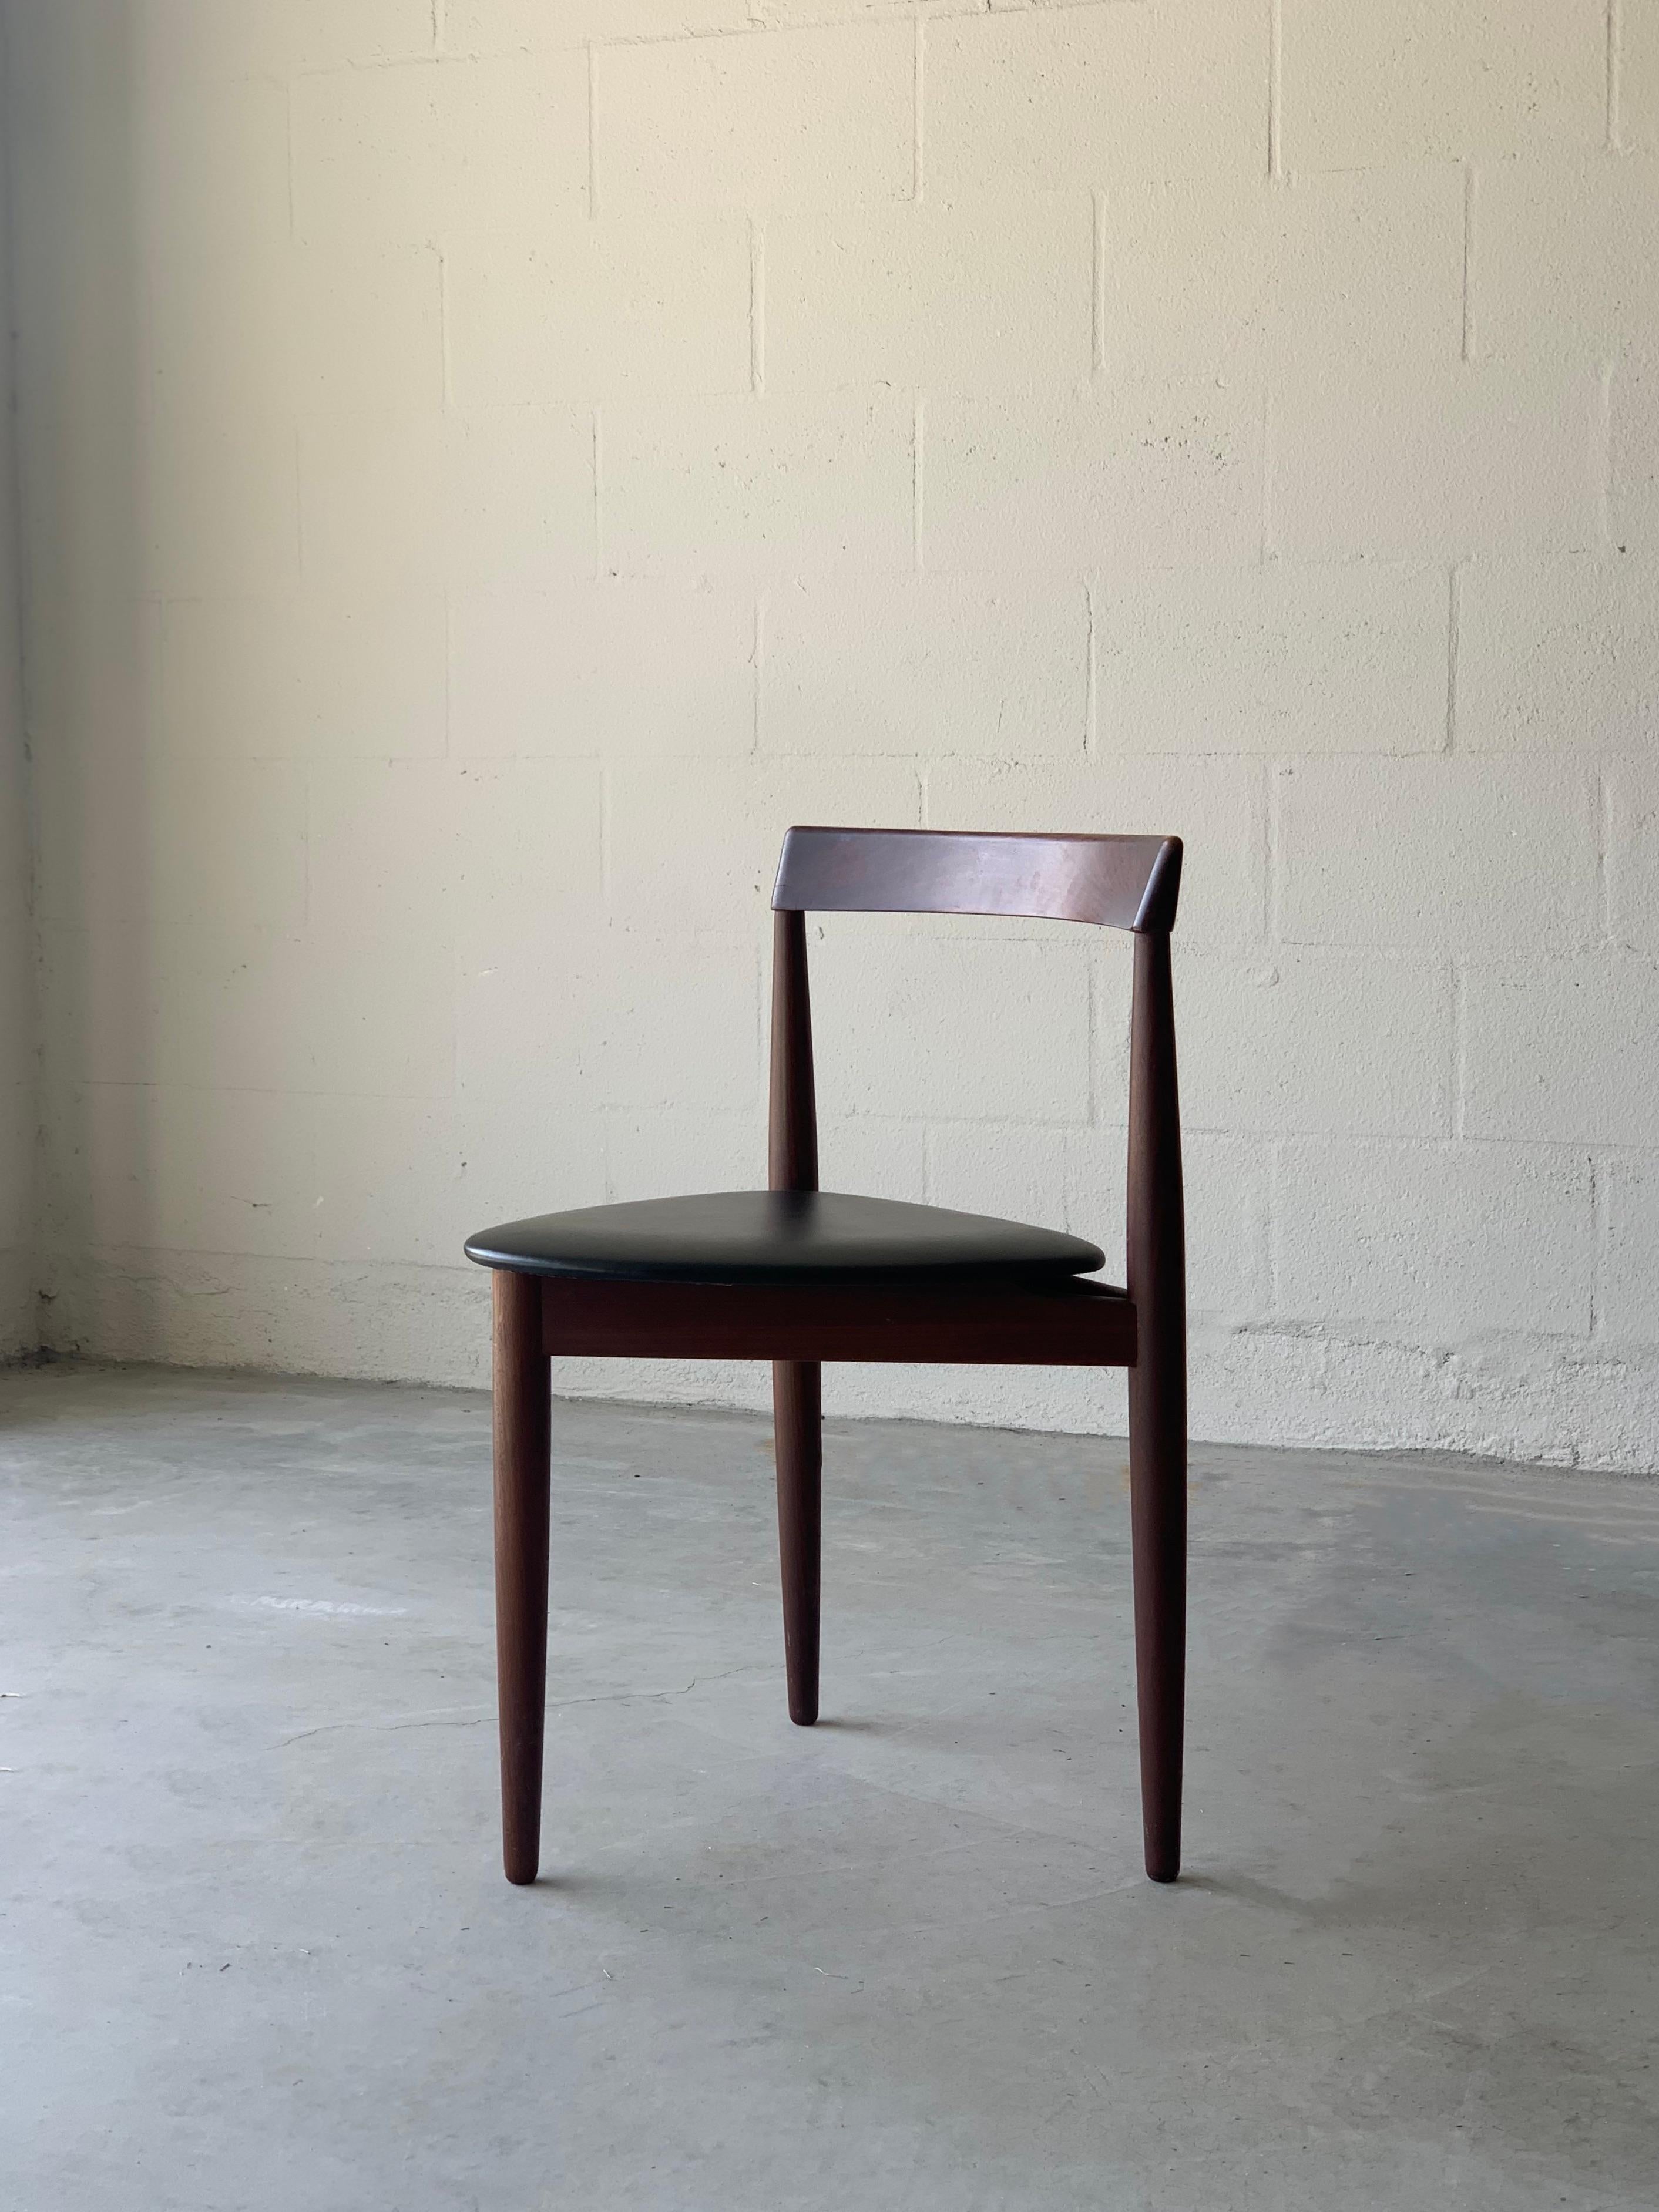 Artful three legged chair / stool in rich walnut finish and black upholstered vinyl. A wonderful example of form and function, stool is able to sustain an ample amount of weight , perfect as extra seating , compact enough to use in varied communal